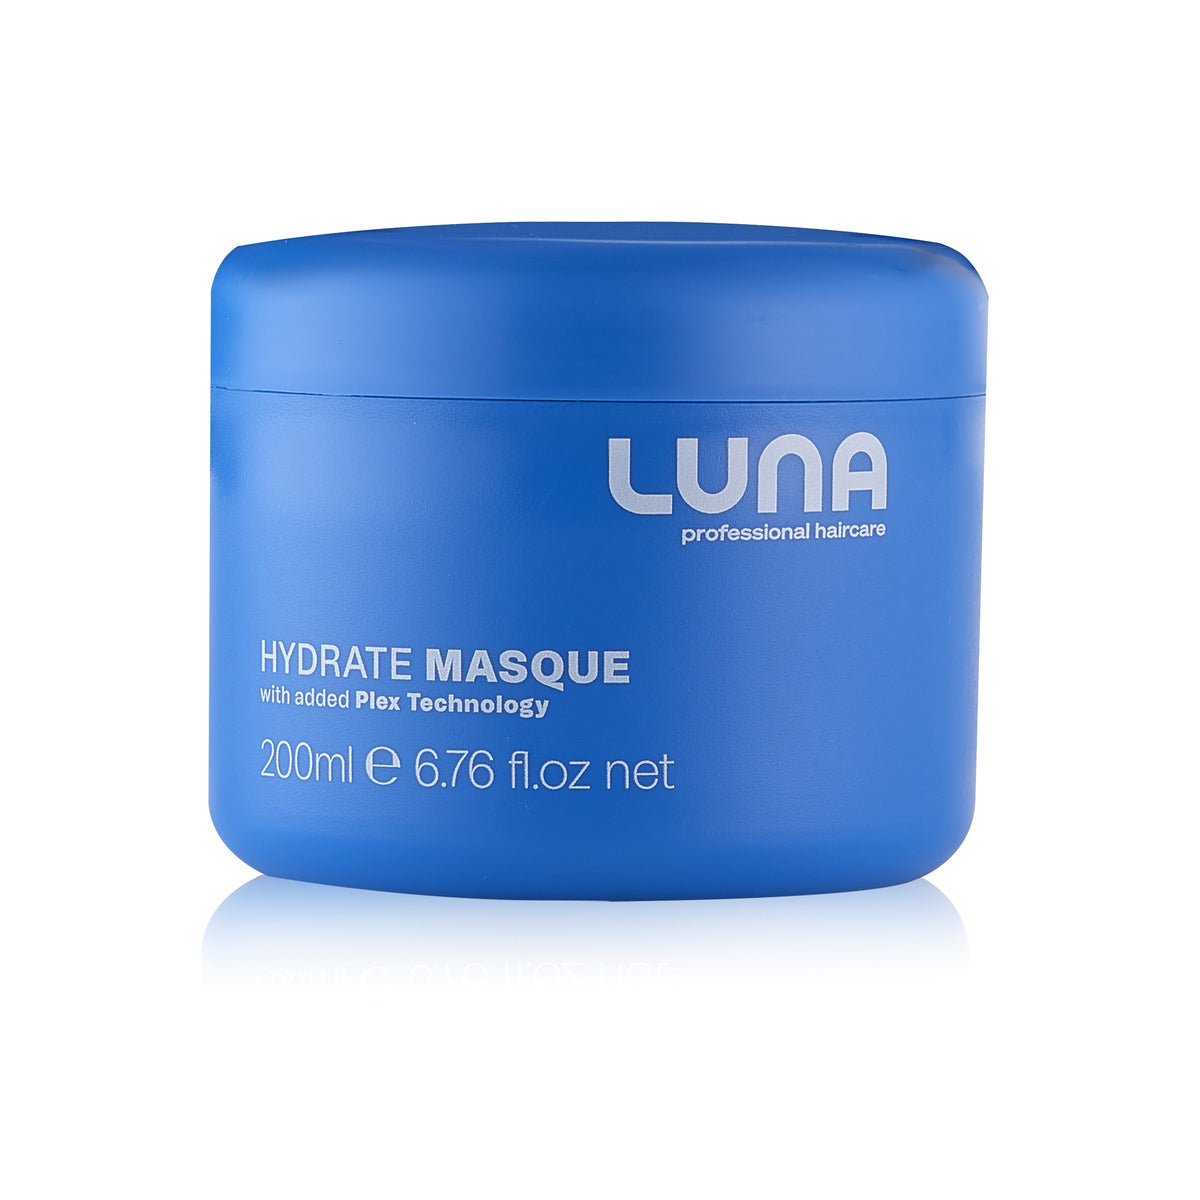 Luna Hydrate Masque 200ml- Lillys Pharmacy and Health Store